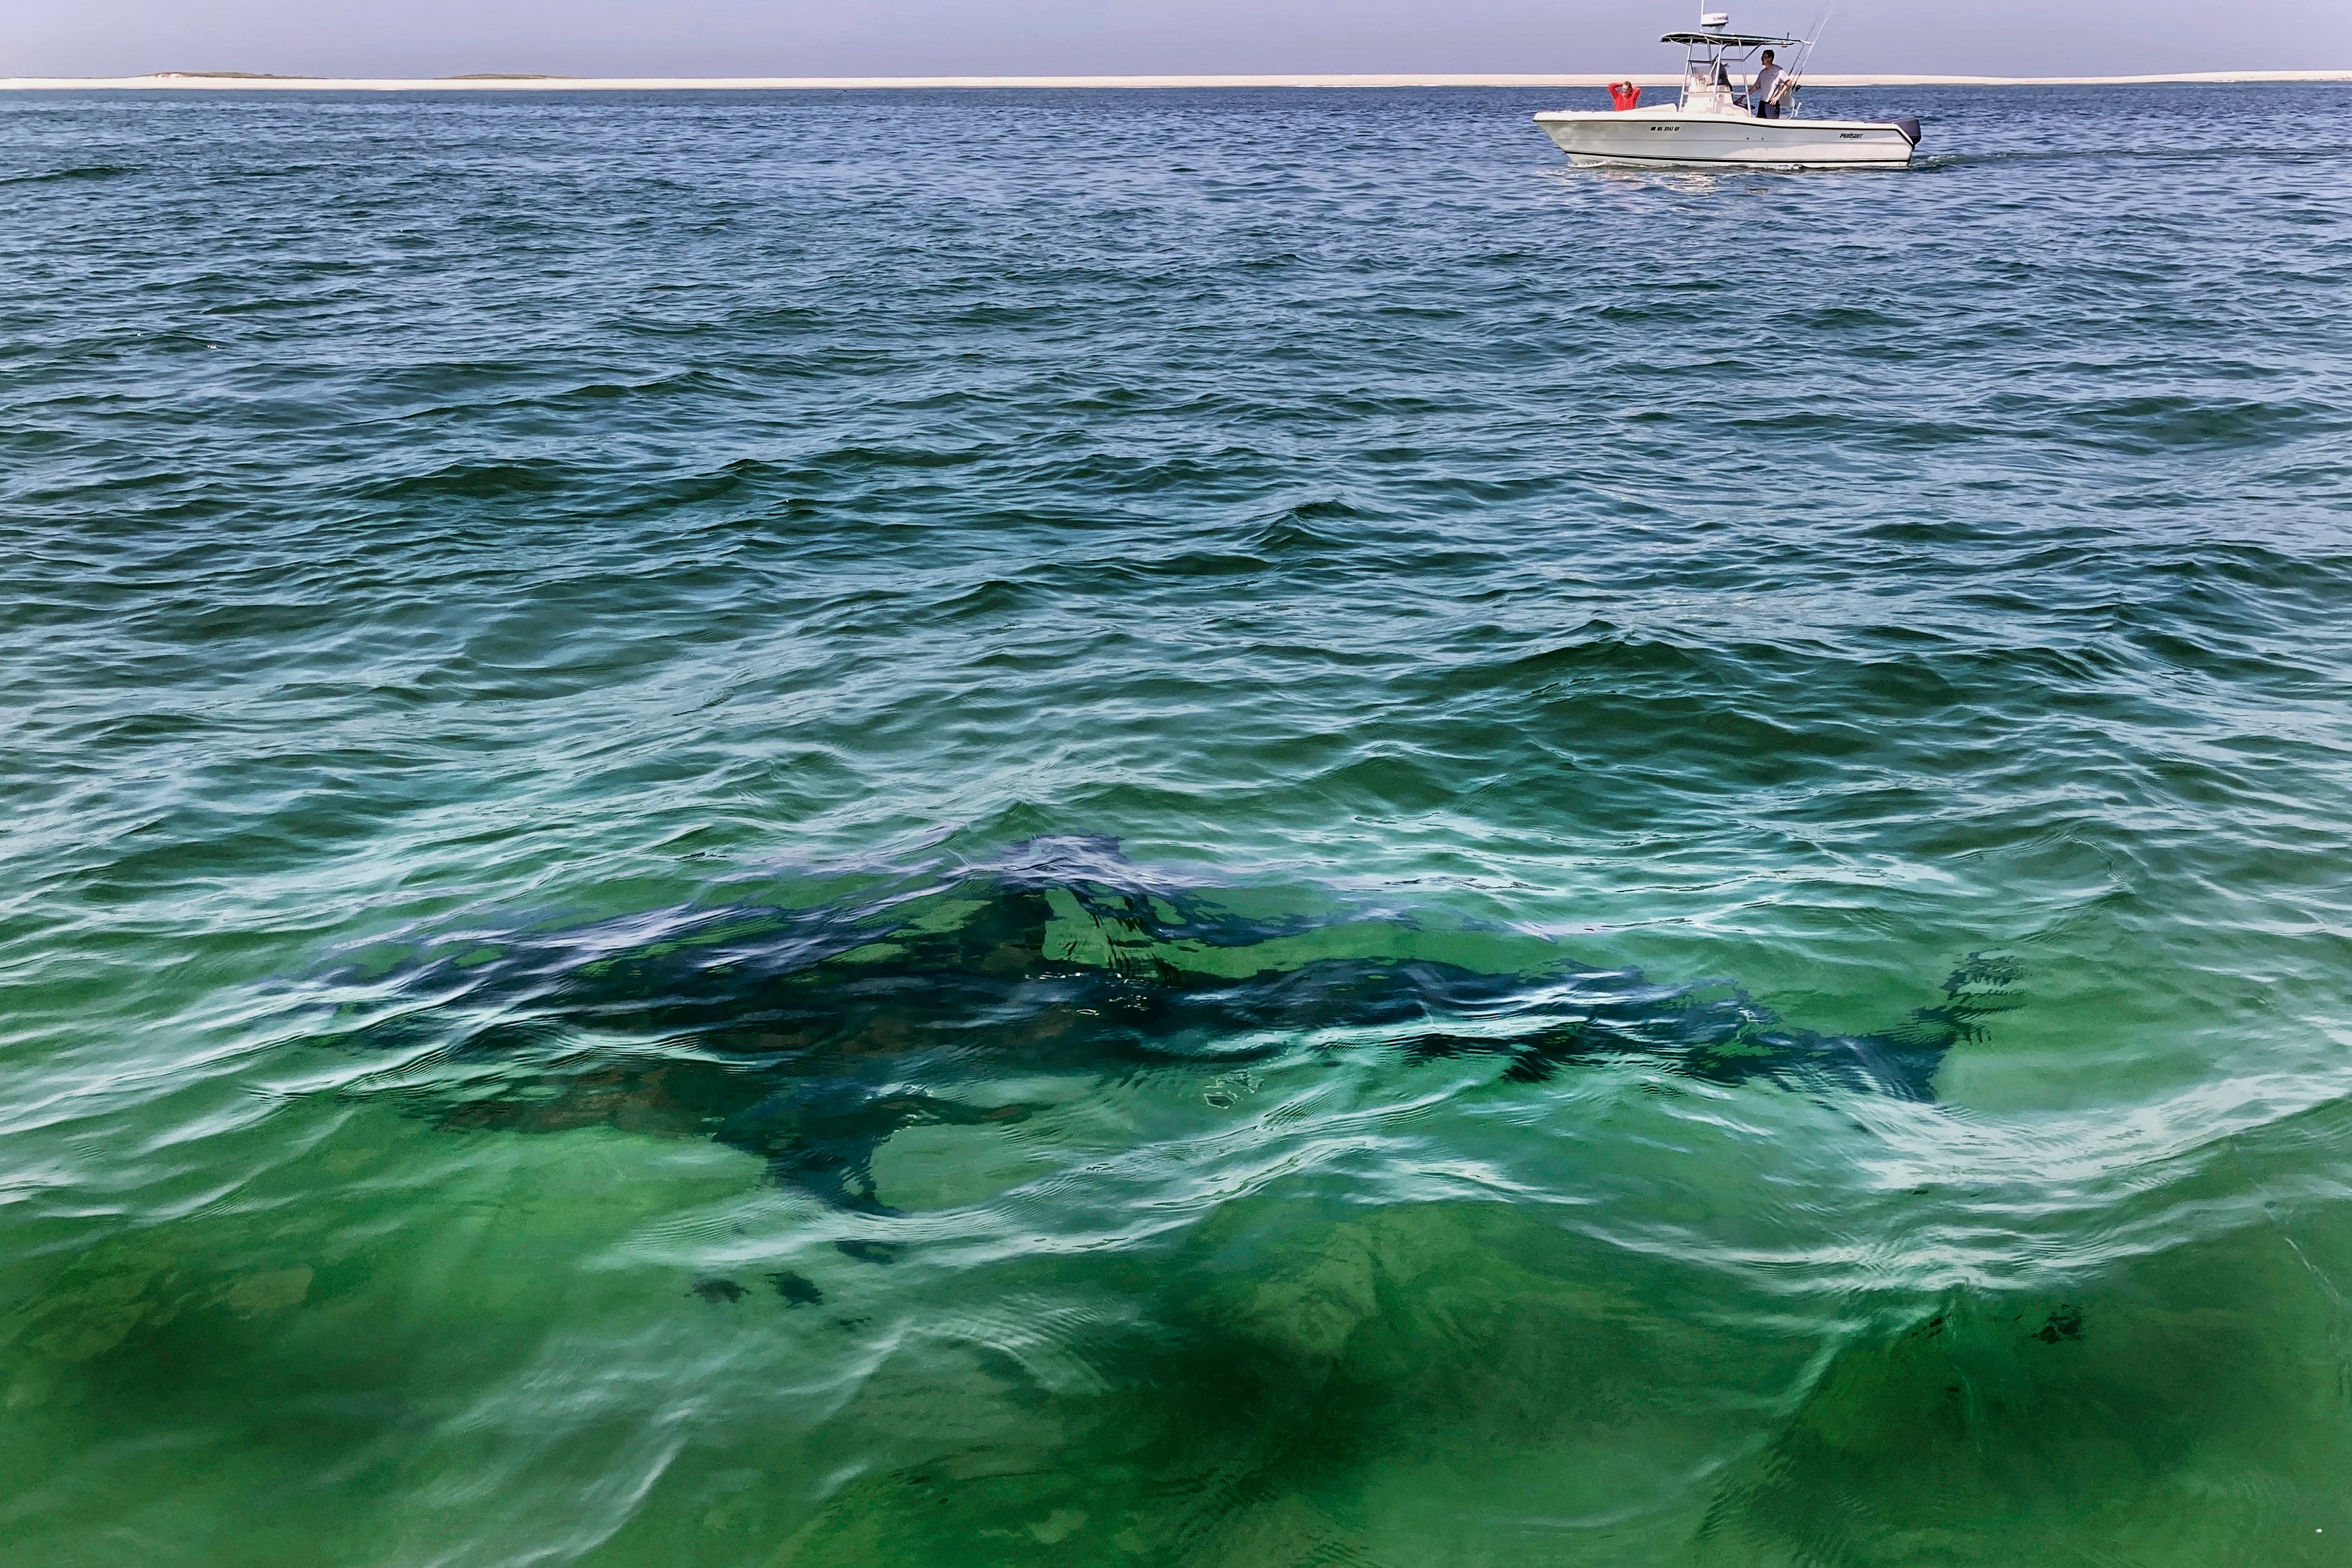 Great white sharks are commonly spotted around Cape Cod